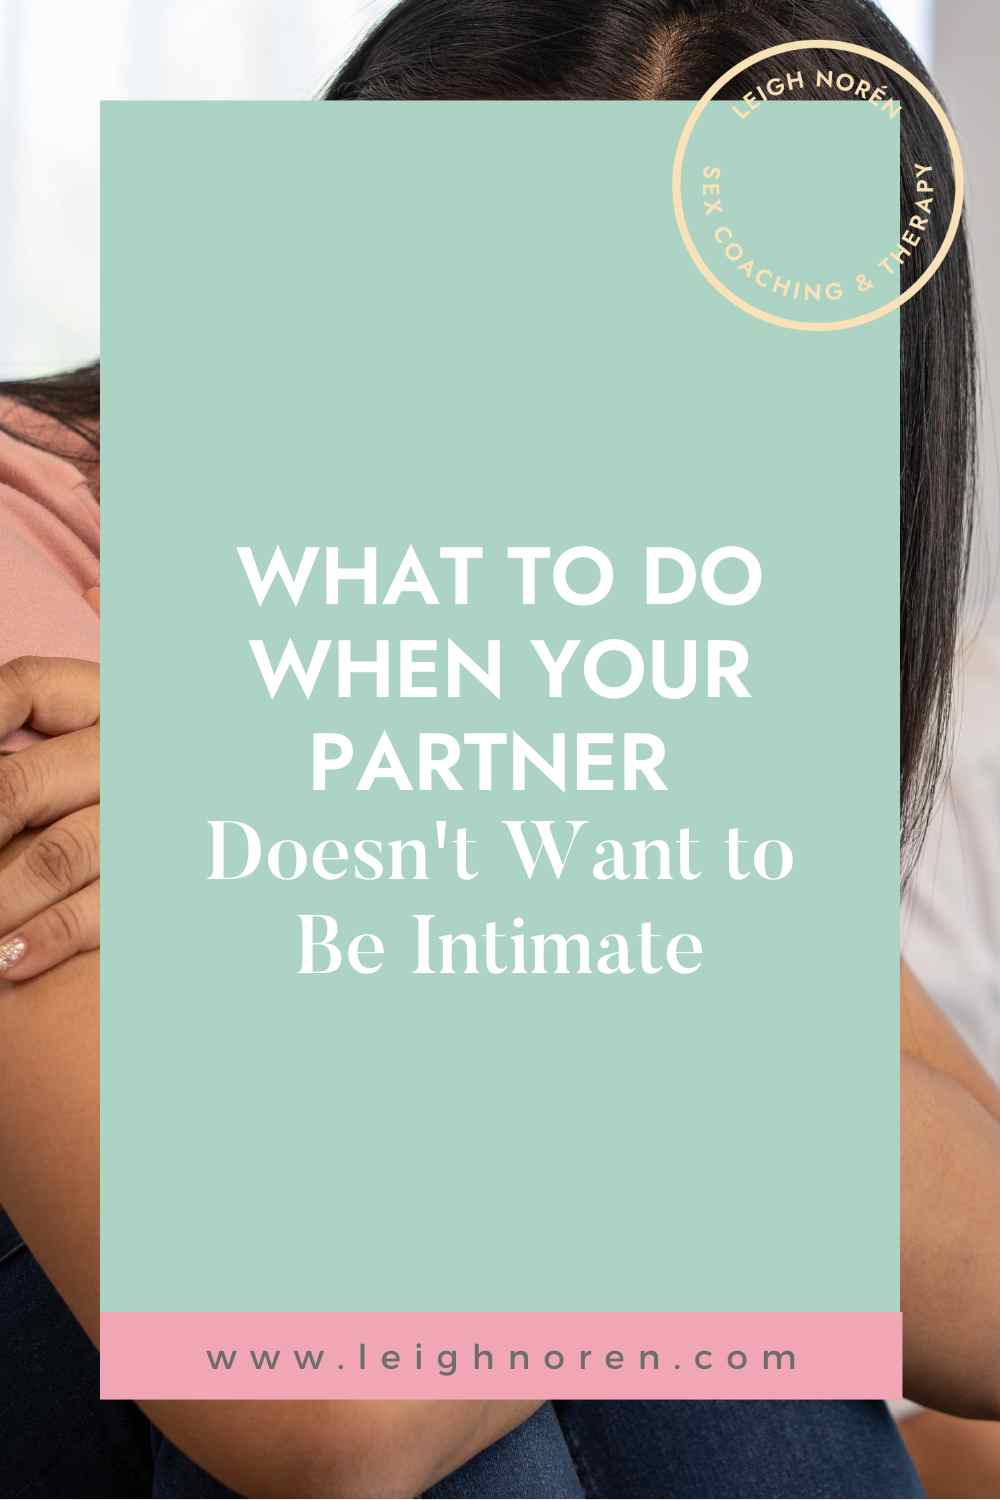 What to Do When Your Partner Doesn't Want to Be Intimate